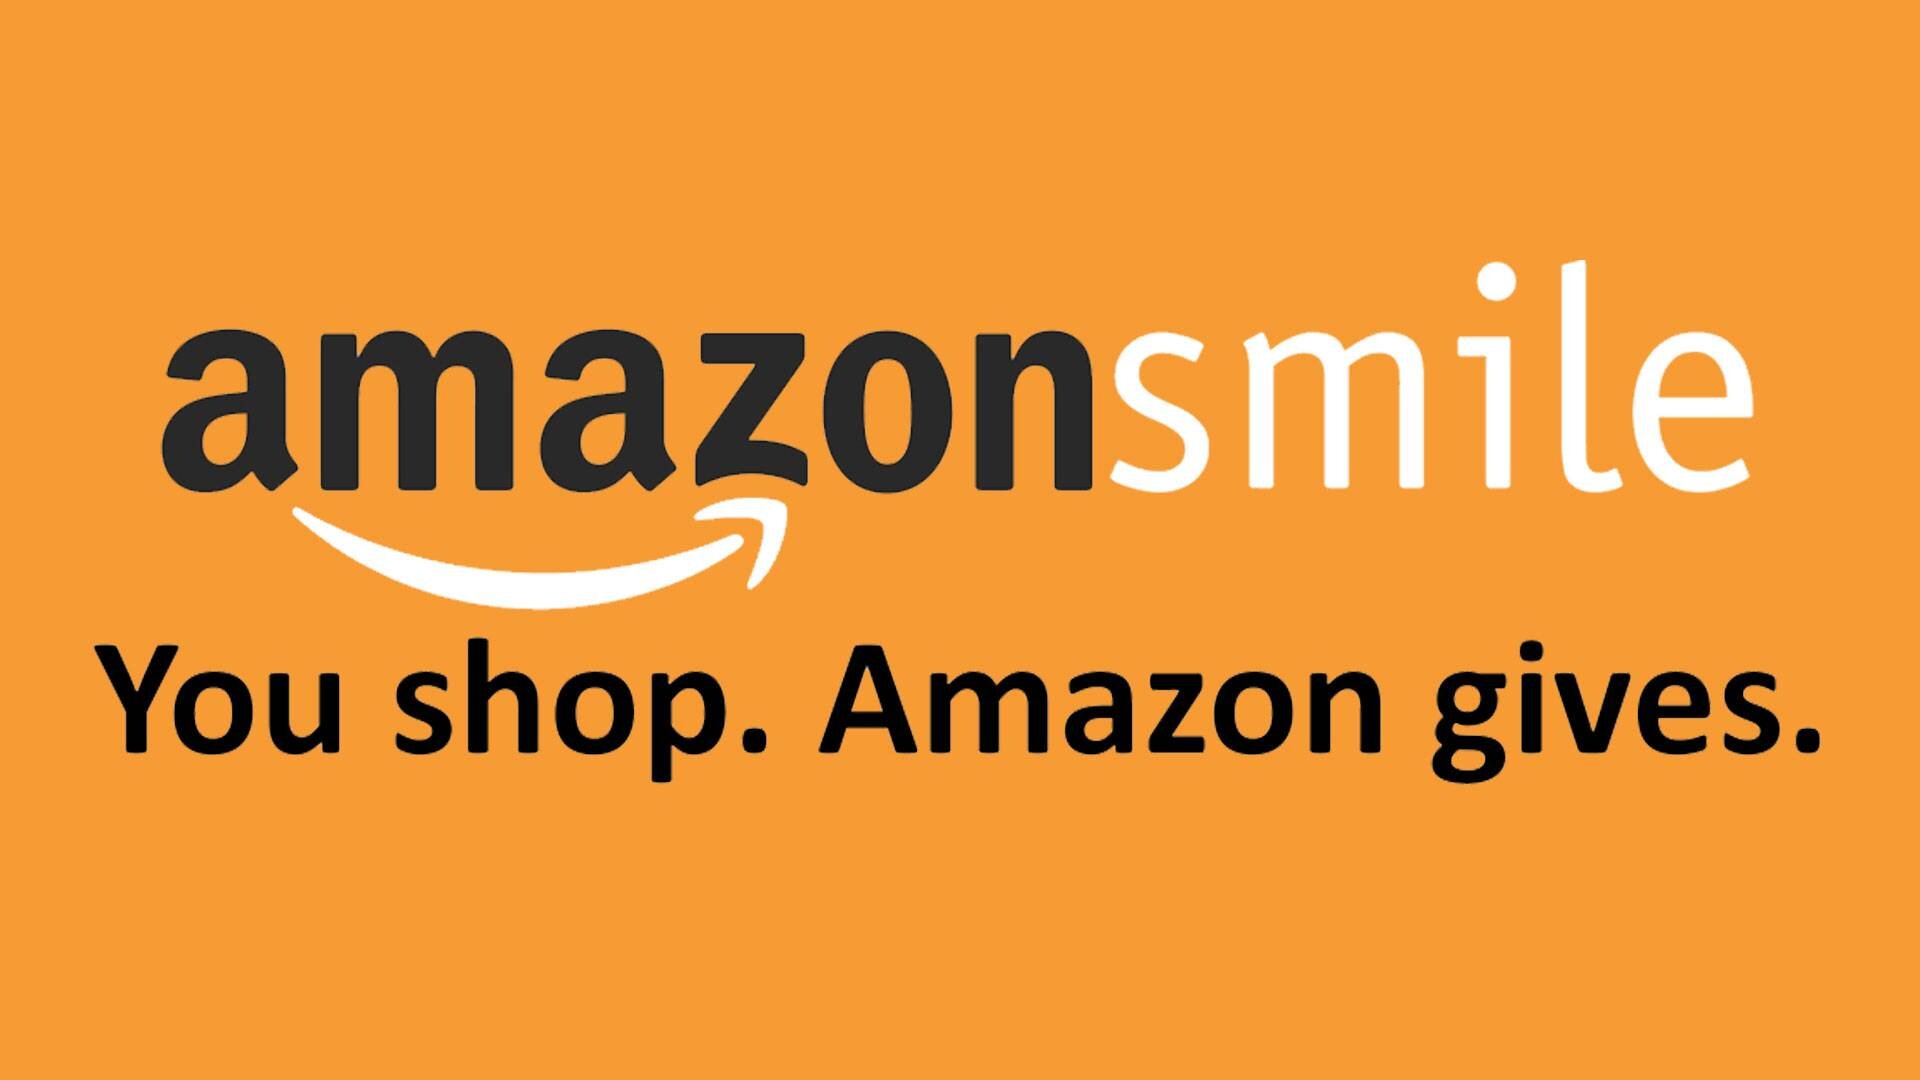 Support us when you shop on Amazon with Amazon Smile